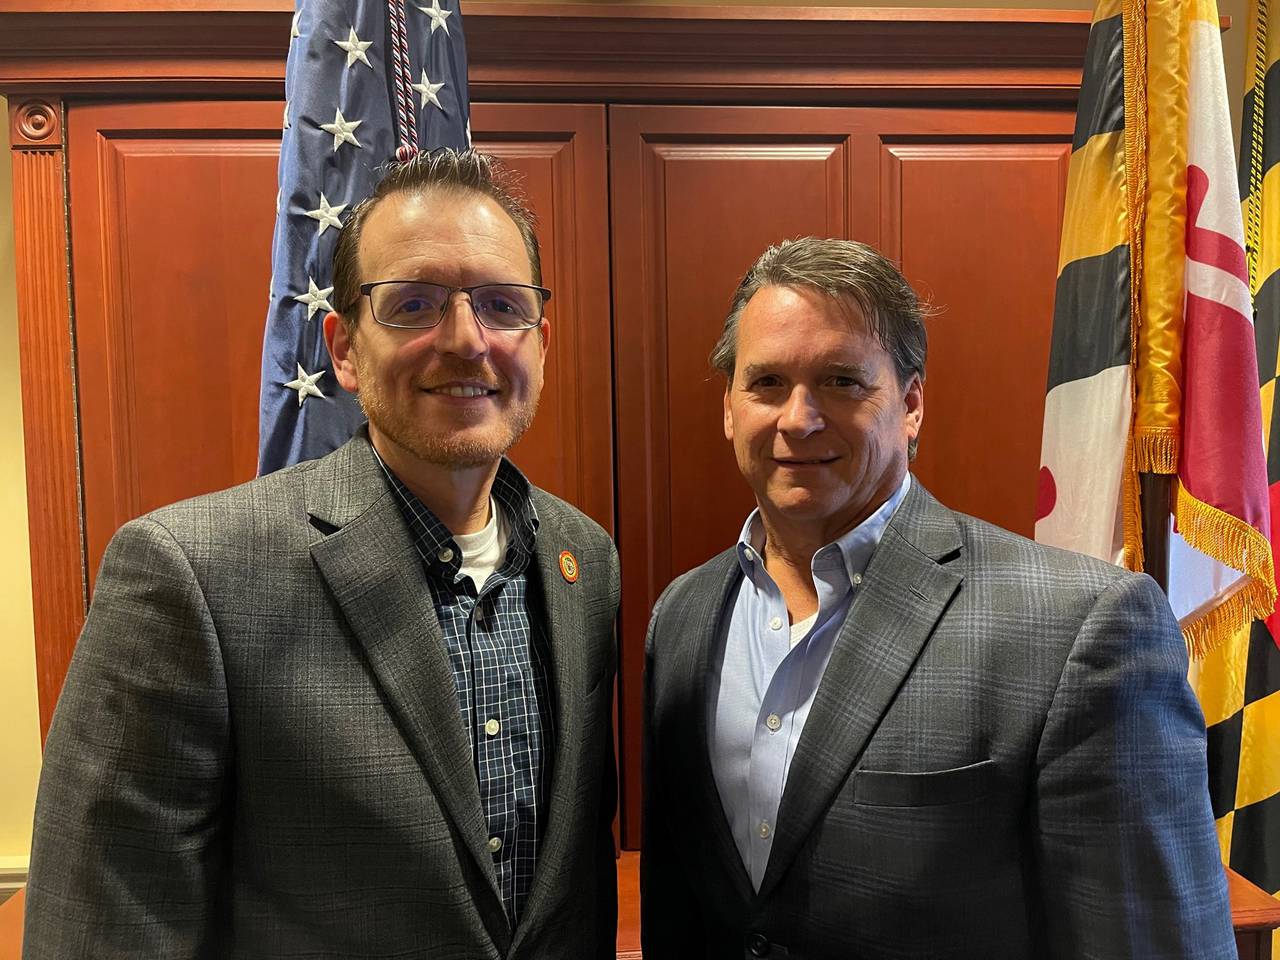 State Sen. Justin Ready of Carroll County, left, and state Sen. Stephen Hershey of the Upper Eastern Shore, right, have been elected as Republican leaders in the Maryland Senate.